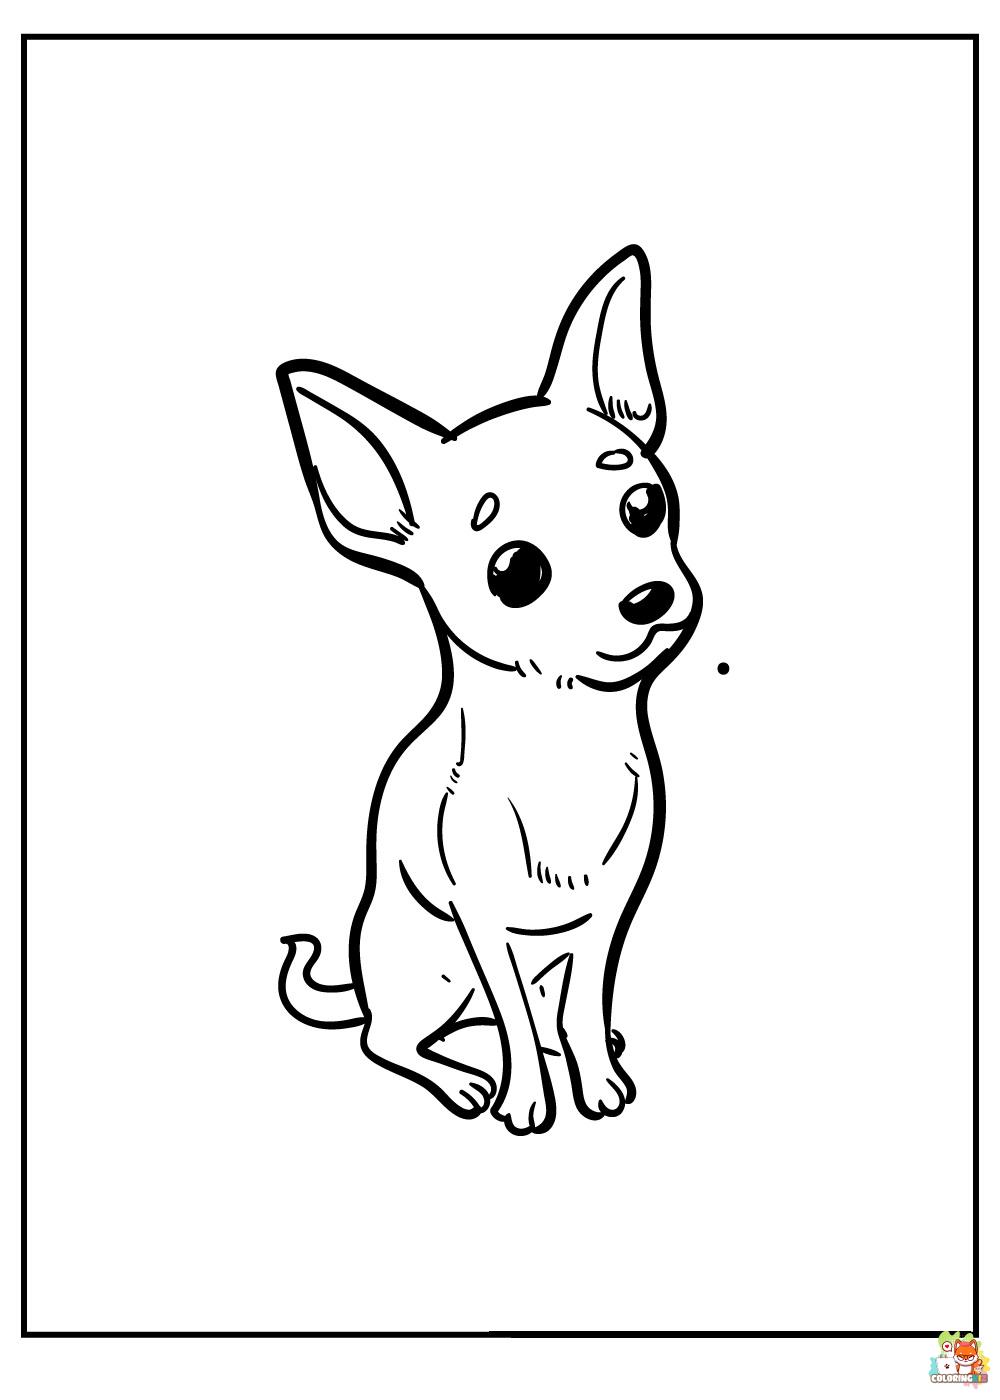 Pomeranian and Chihuahua Coloring Pages 6